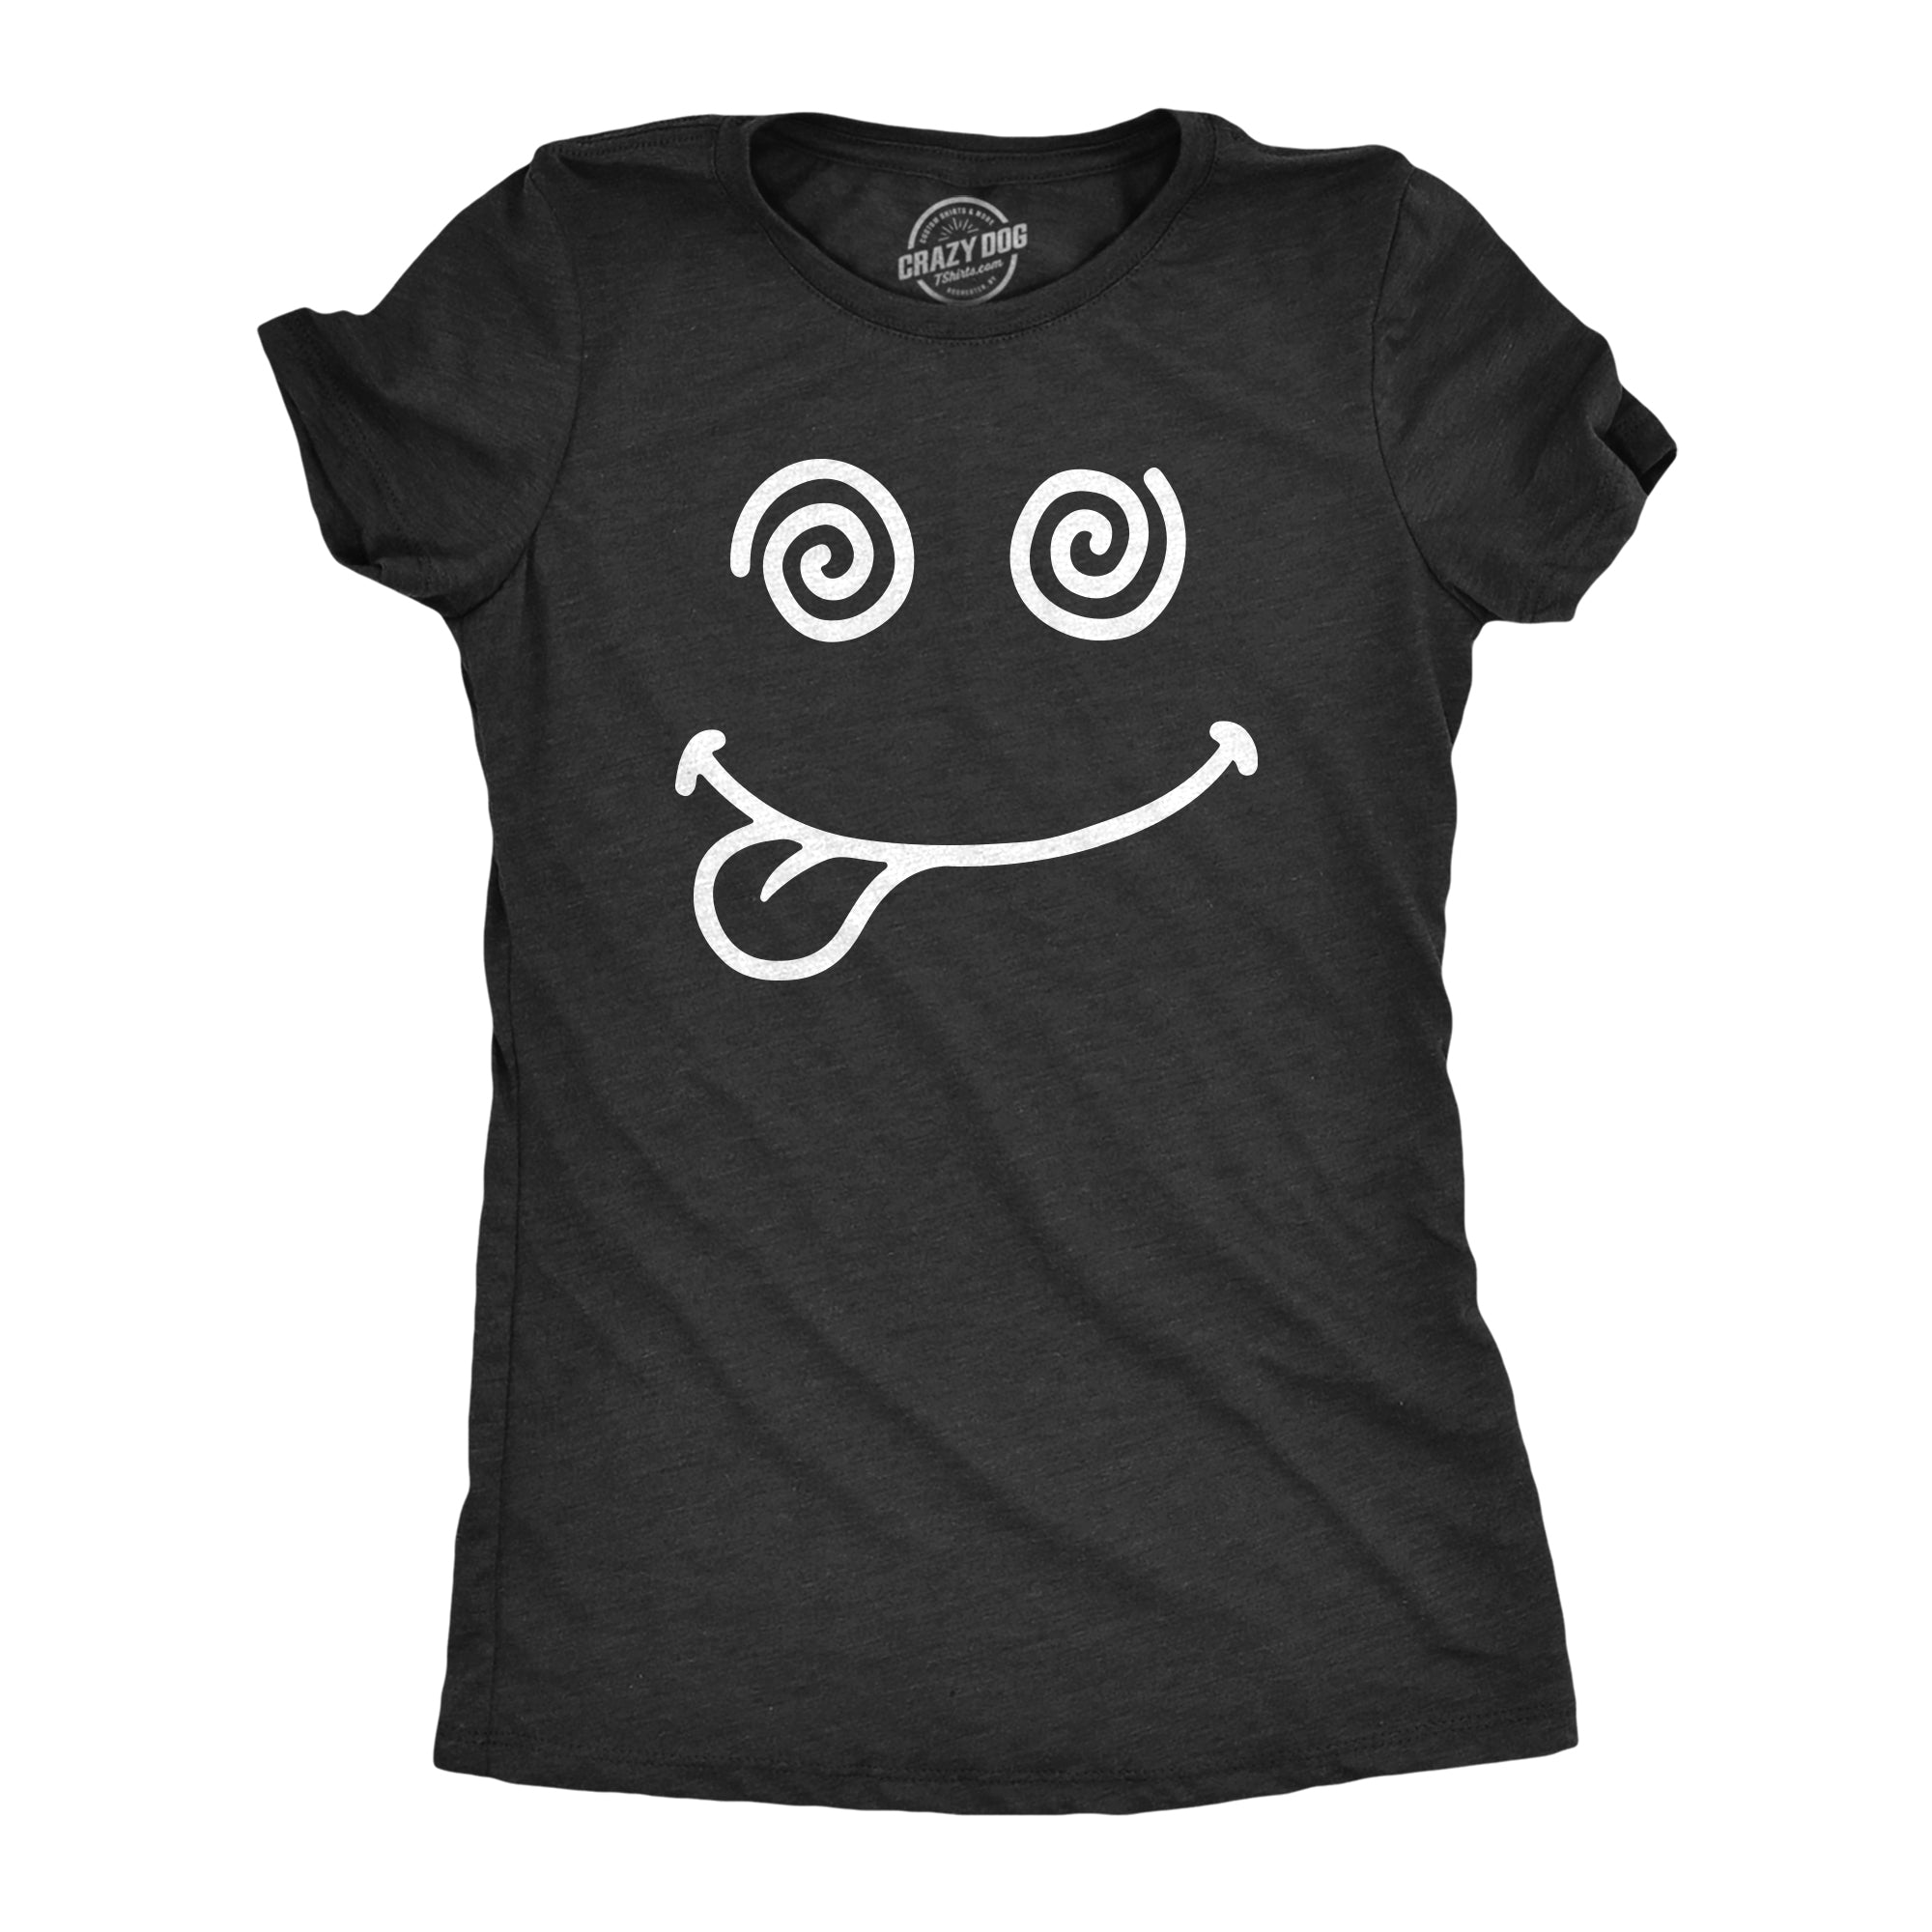 Funny Heather Black - CRAZY Crazy Smile Womens T Shirt Nerdy Sarcastic Tee